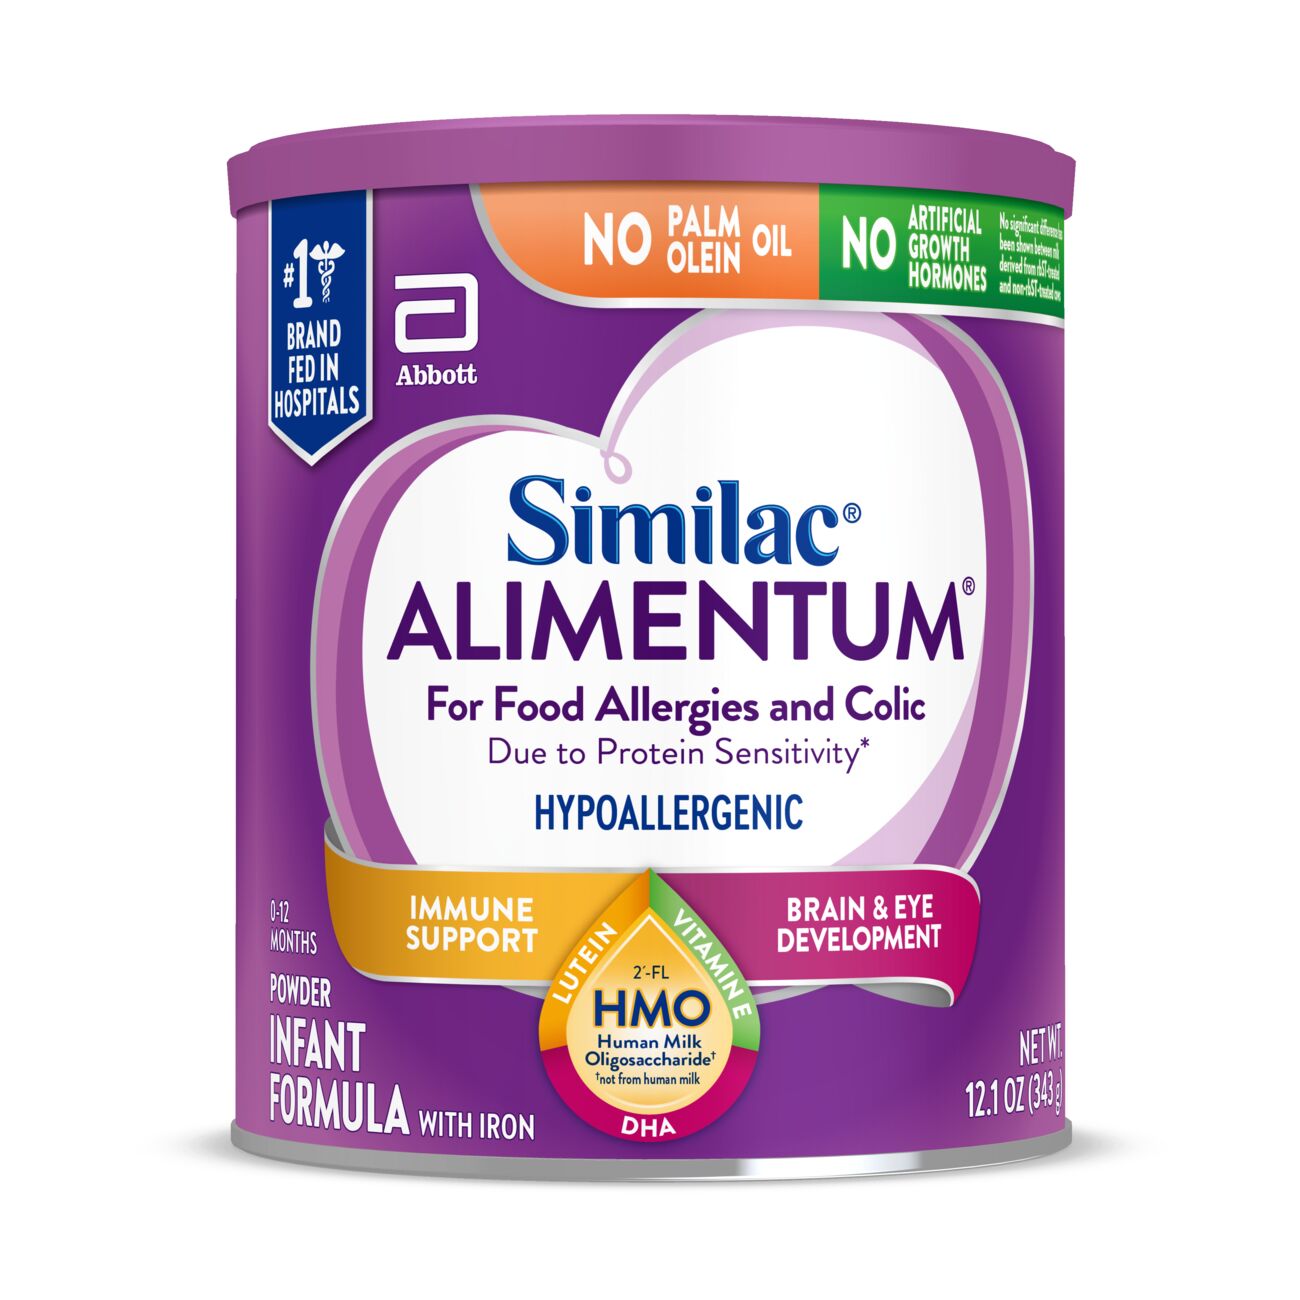 Similac Alimentum Hypoallergenic For Food Allergies and Colic Infant Formula  Powder 12.1 oz, 1CT